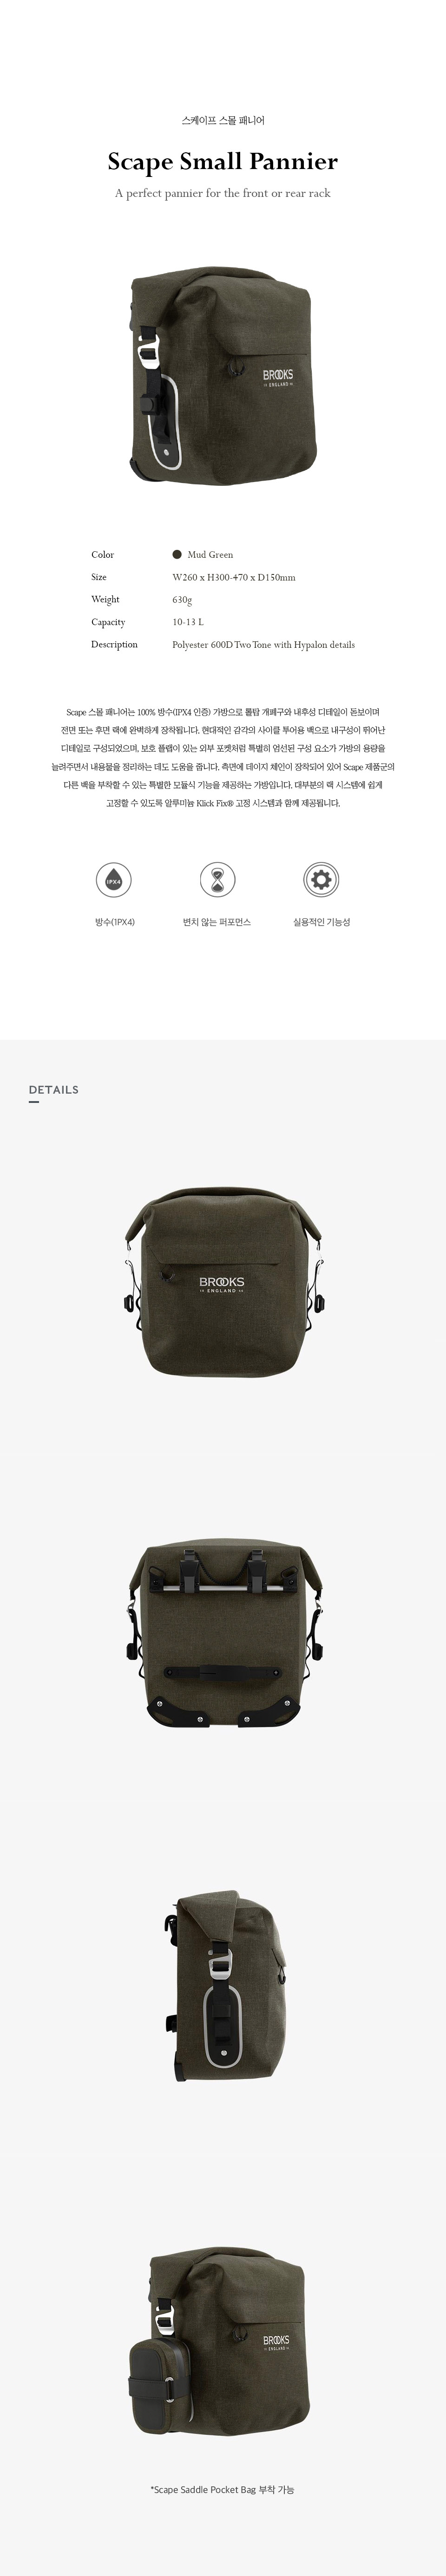 [BS]_scape_collection_pannier_small_194143.jpg